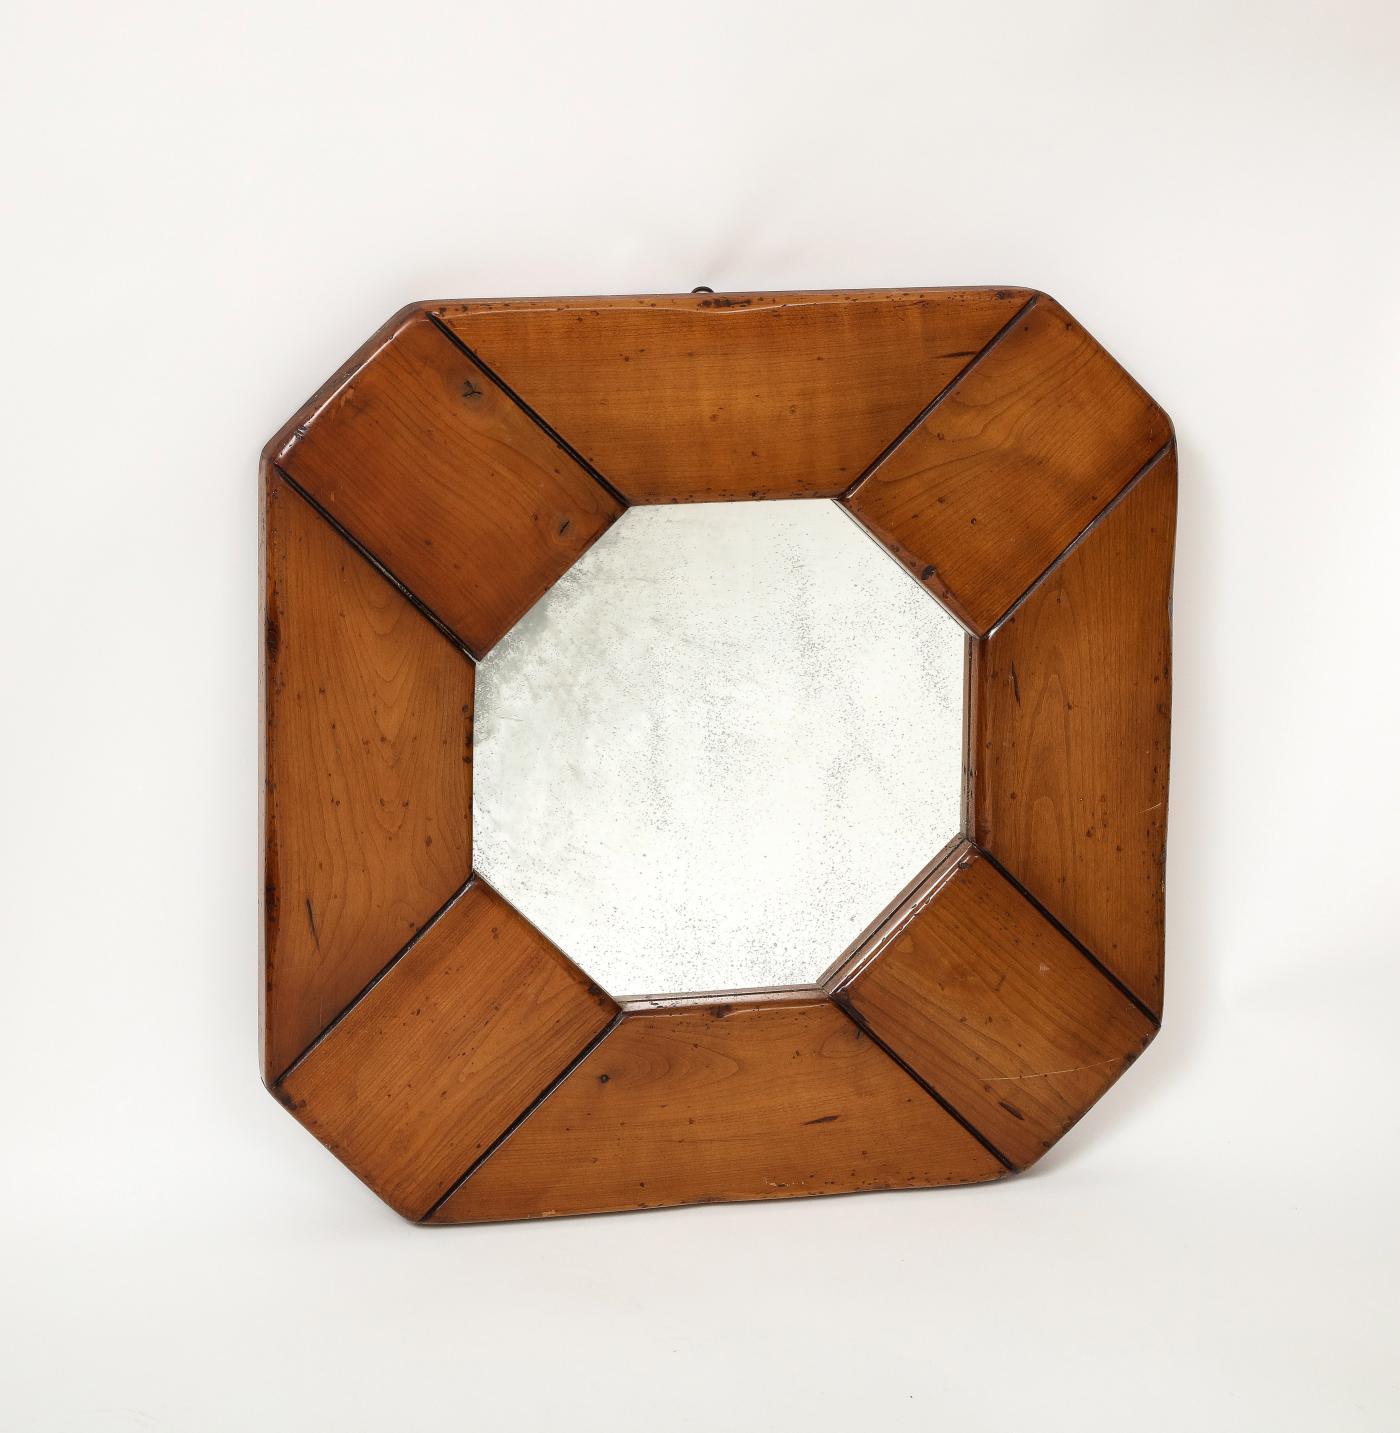 Modern Elm Mirror with Patinated Glass, France

Elm Mirror with a large wood frame and beautifully aged glass. Rustic and modern.
